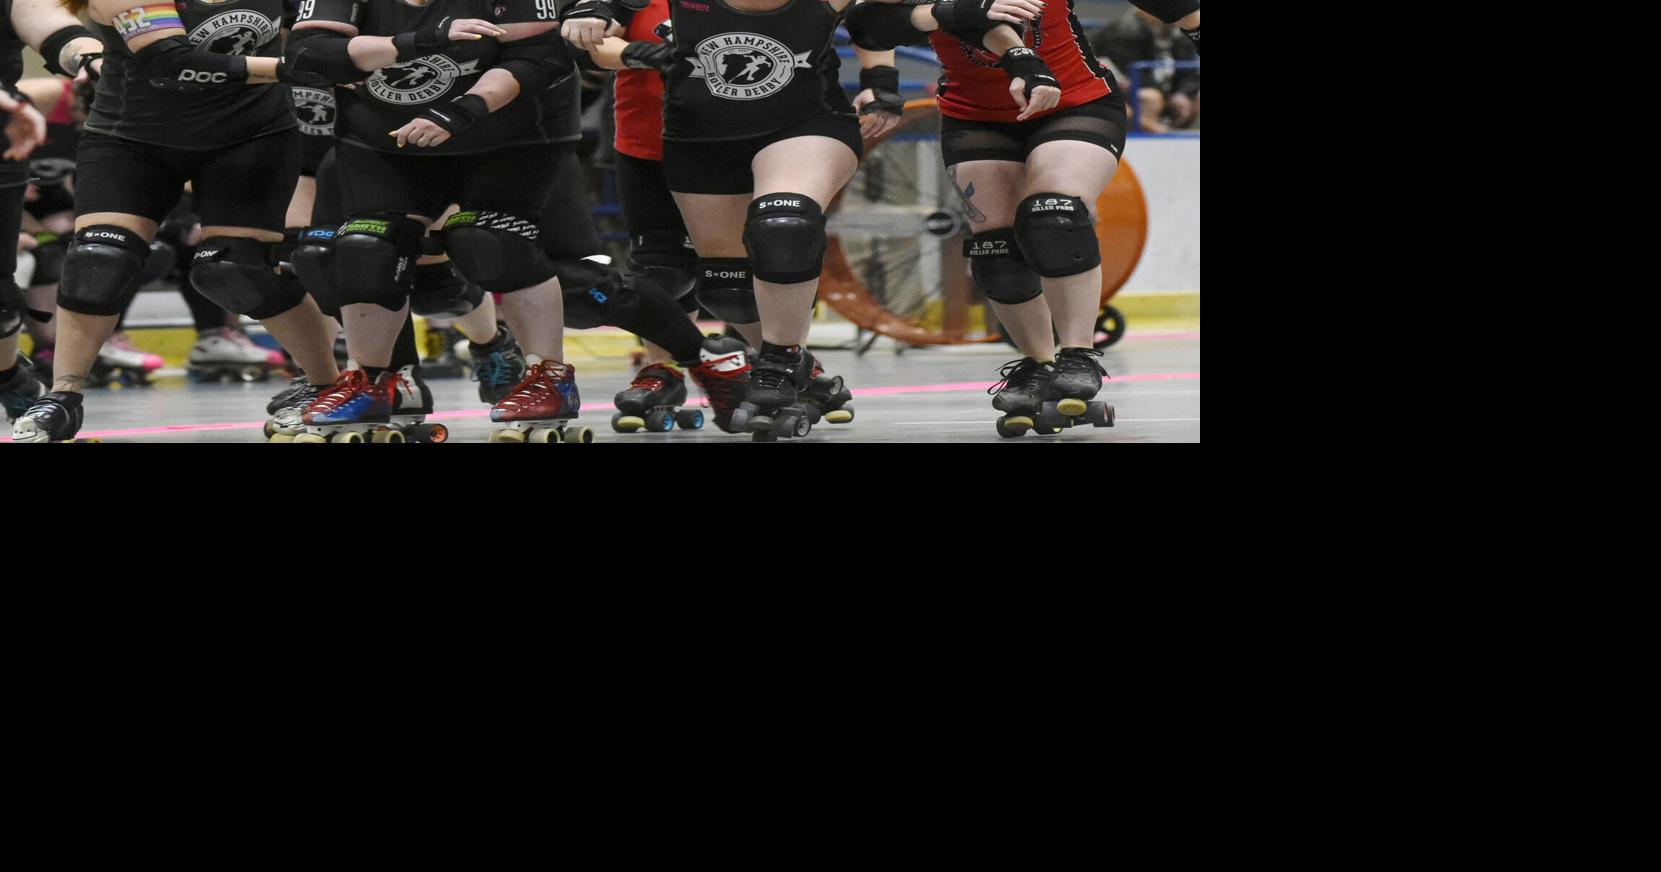 This is no 1970s theatrics. Today’s roller derby is about competition — and getting along